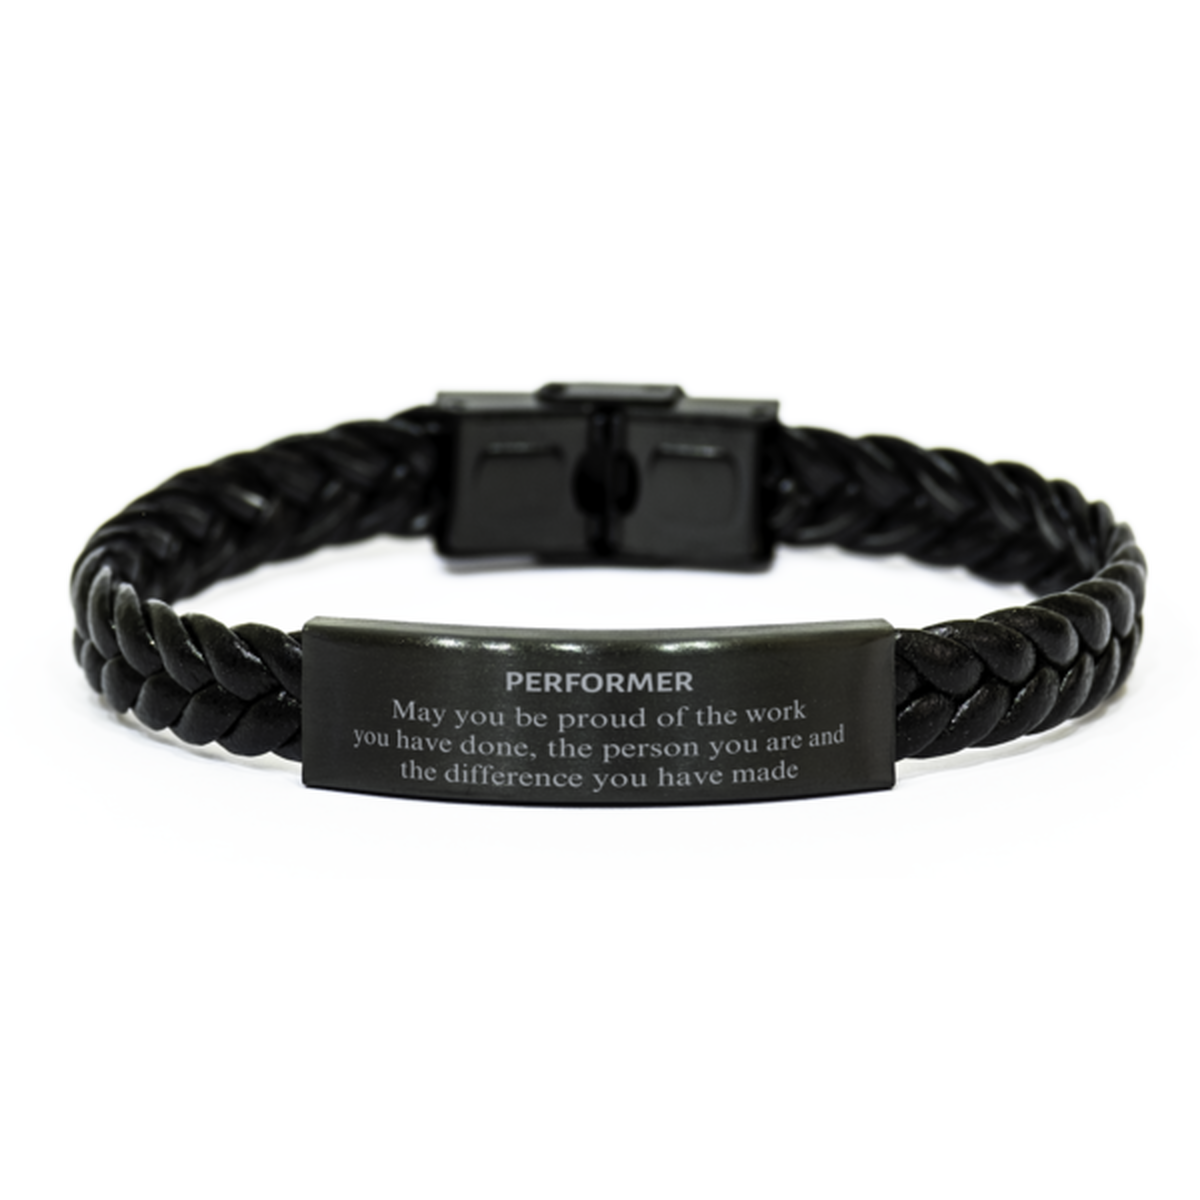 Performer May you be proud of the work you have done, Retirement Performer Braided Leather Bracelet for Colleague Appreciation Gifts Amazing for Performer